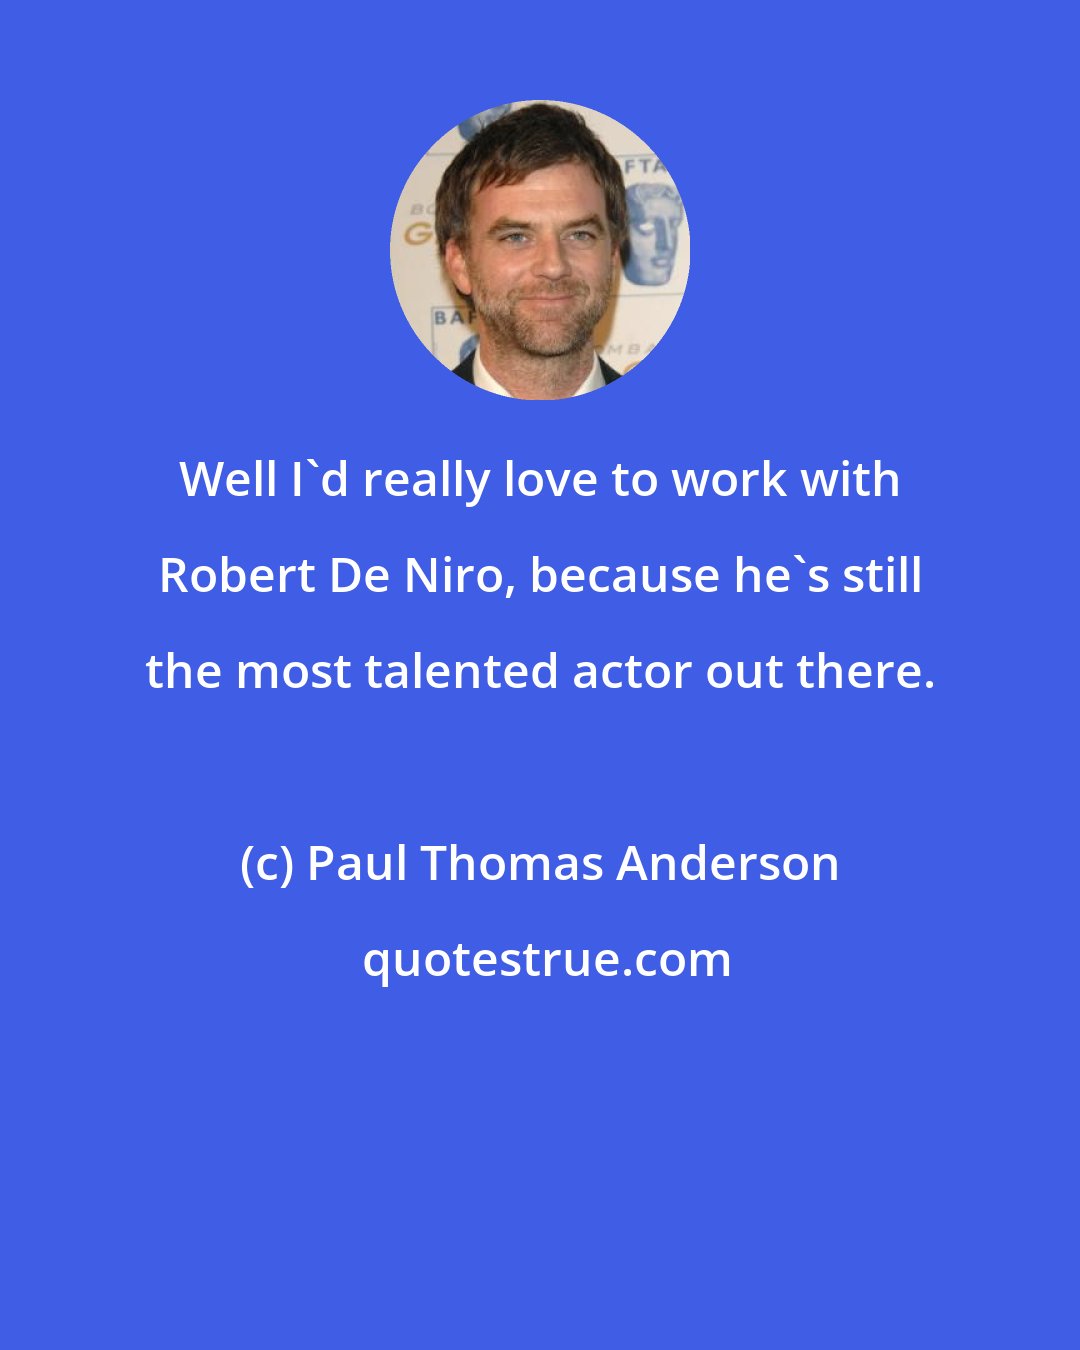 Paul Thomas Anderson: Well I'd really love to work with Robert De Niro, because he's still the most talented actor out there.